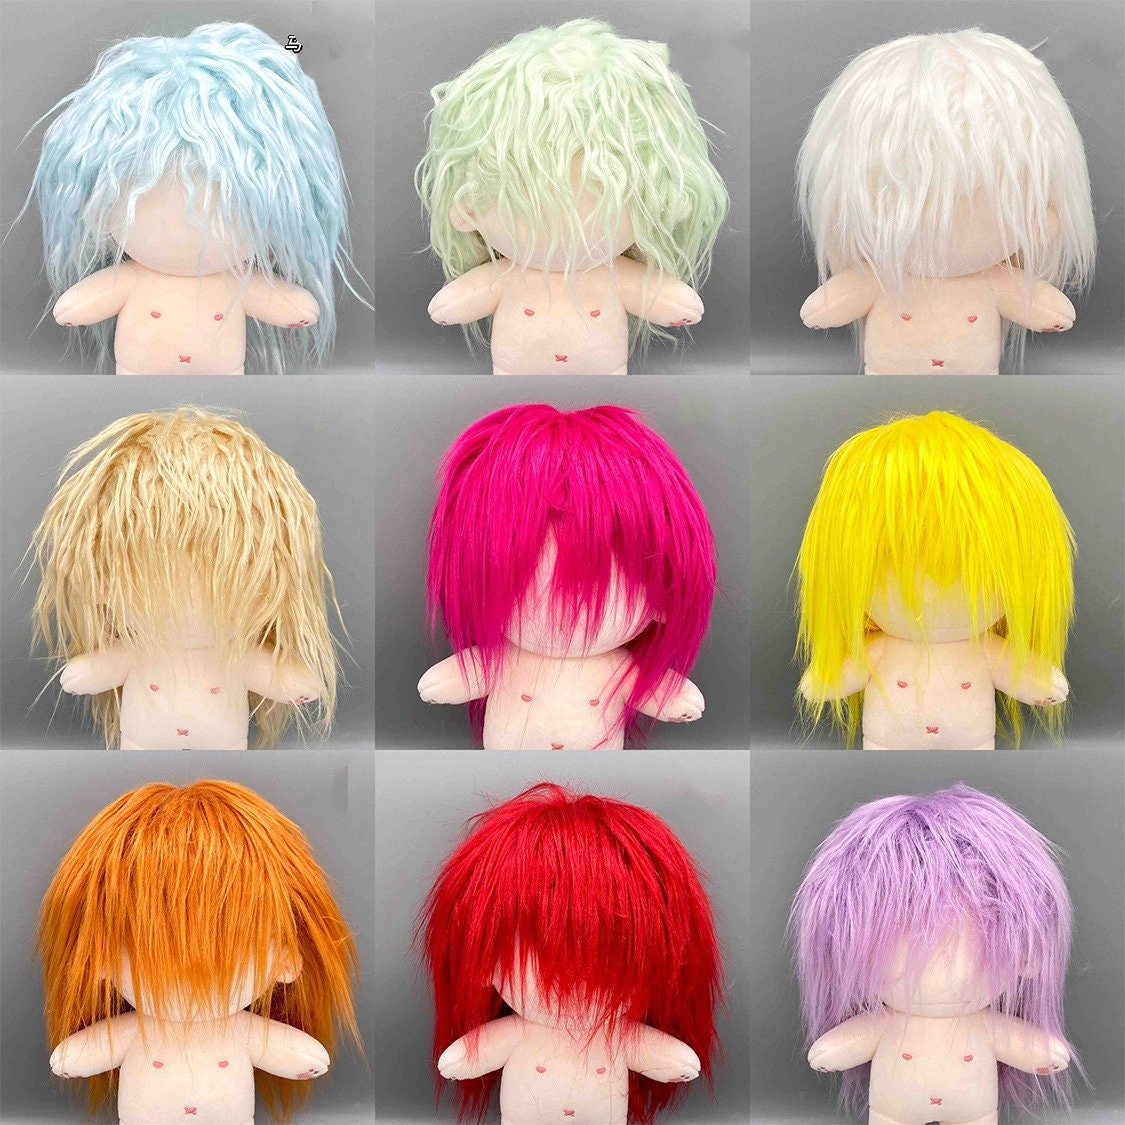  VILLCASE 6pcs Doll Wig Doll Hair Tool Doll Hair Wefts Craft  Wool Hair Wig for Dolls Doll Hair Wig Crafts for Kids Synthetic Straight Dolls  Hair High Temperature Wire Supplies Delicate